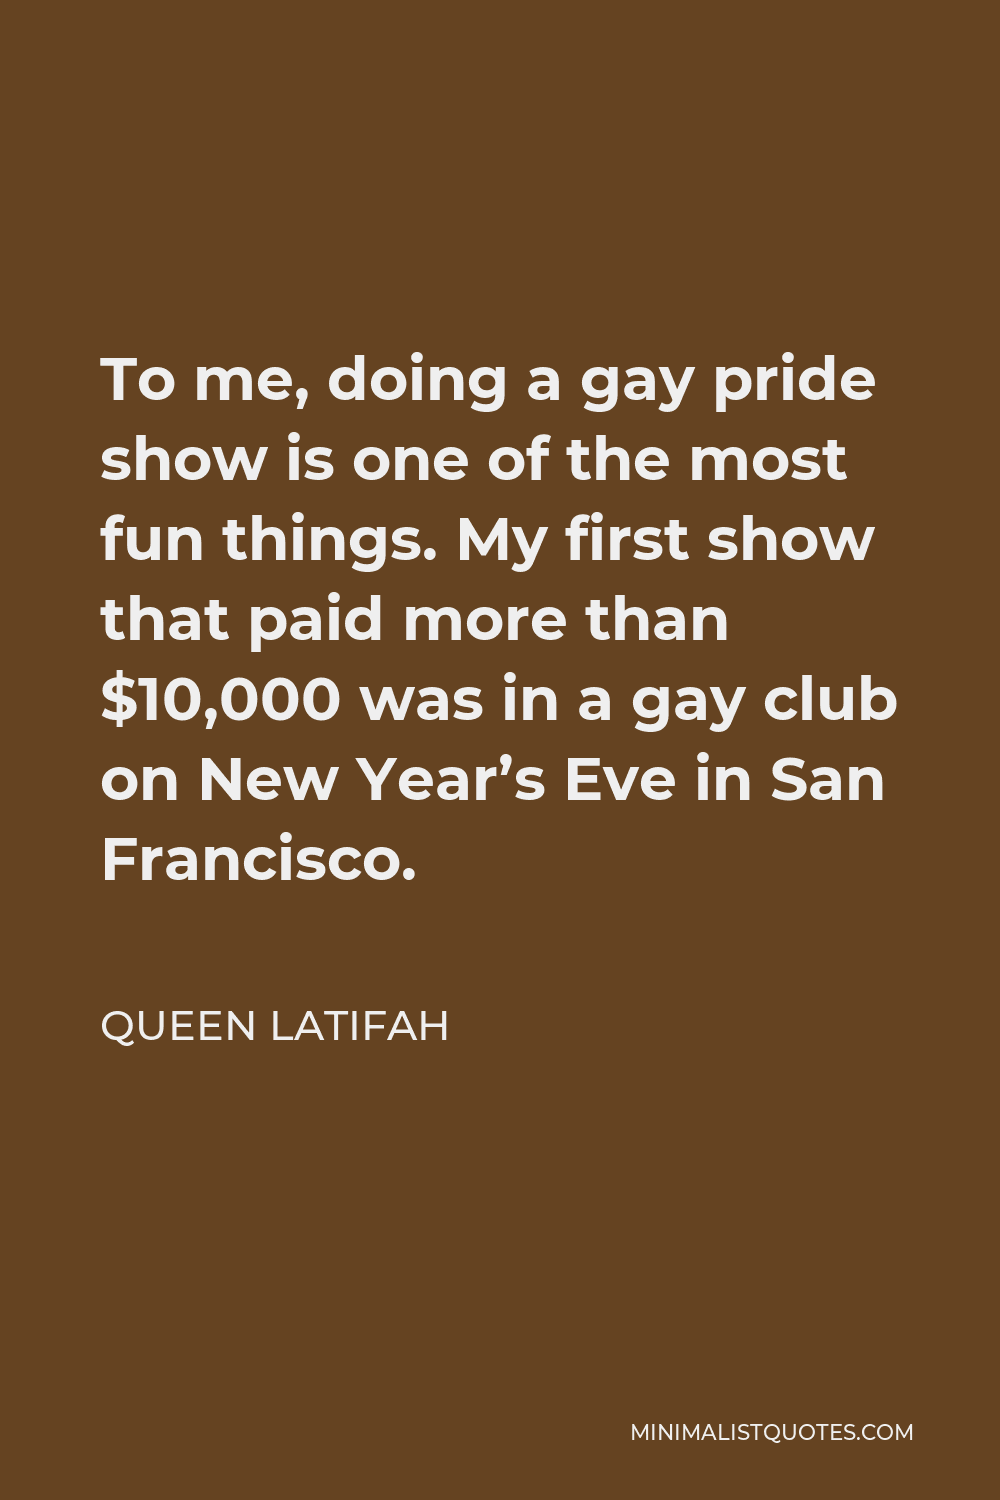 Queen Latifah Quote - To me, doing a gay pride show is one of the most fun things. My first show that paid more than $10,000 was in a gay club on New Year’s Eve in San Francisco.